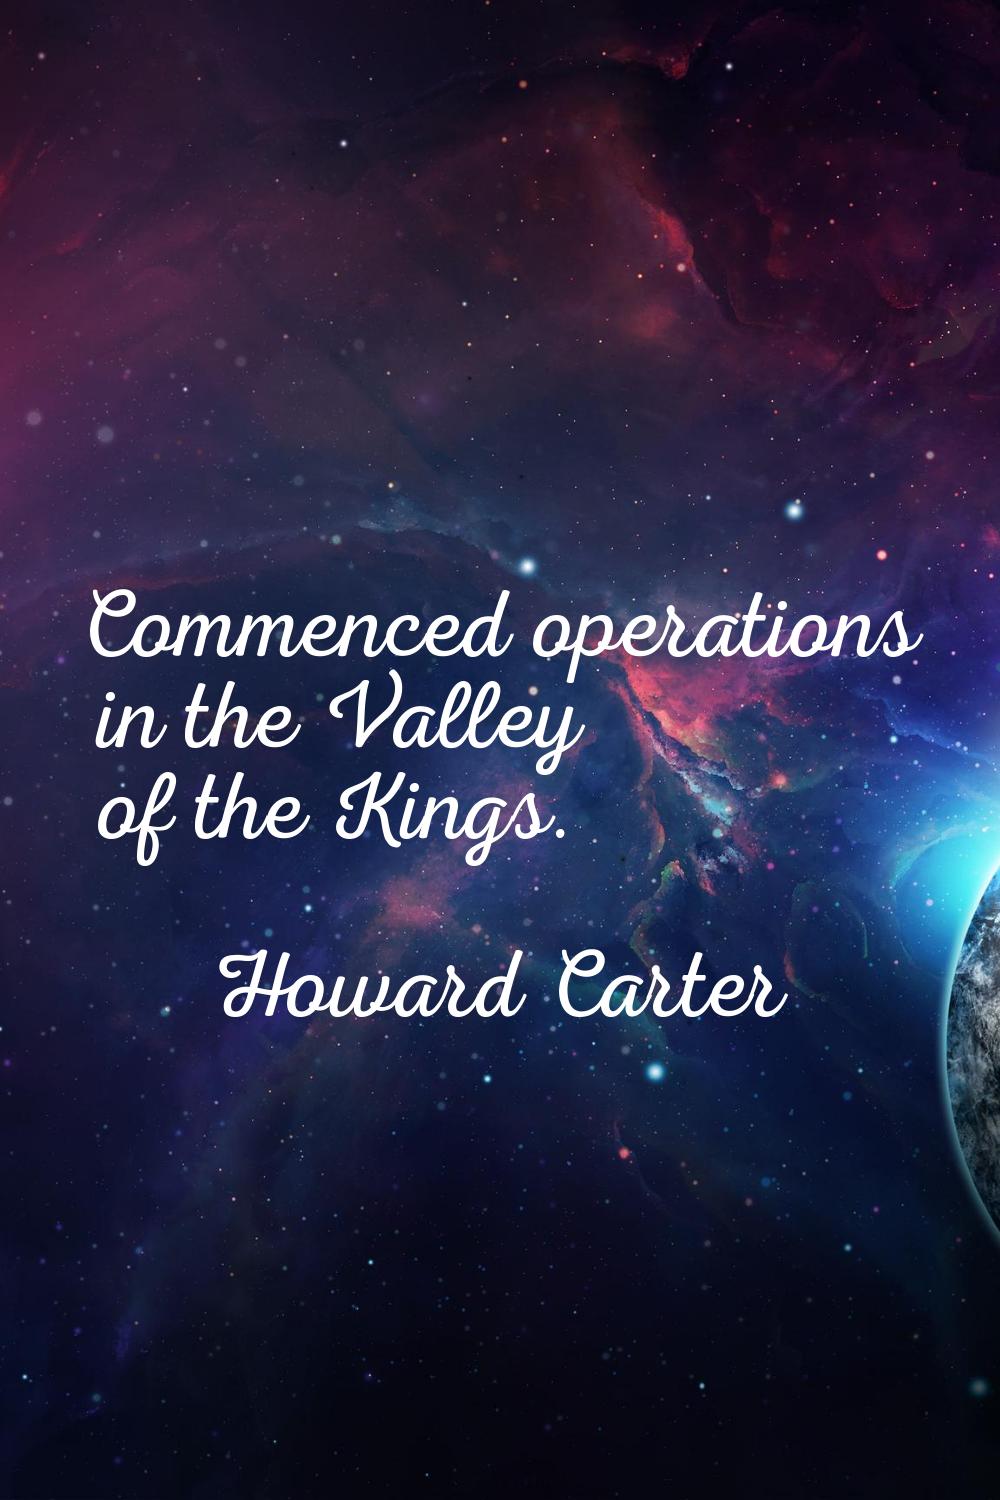 Commenced operations in the Valley of the Kings.